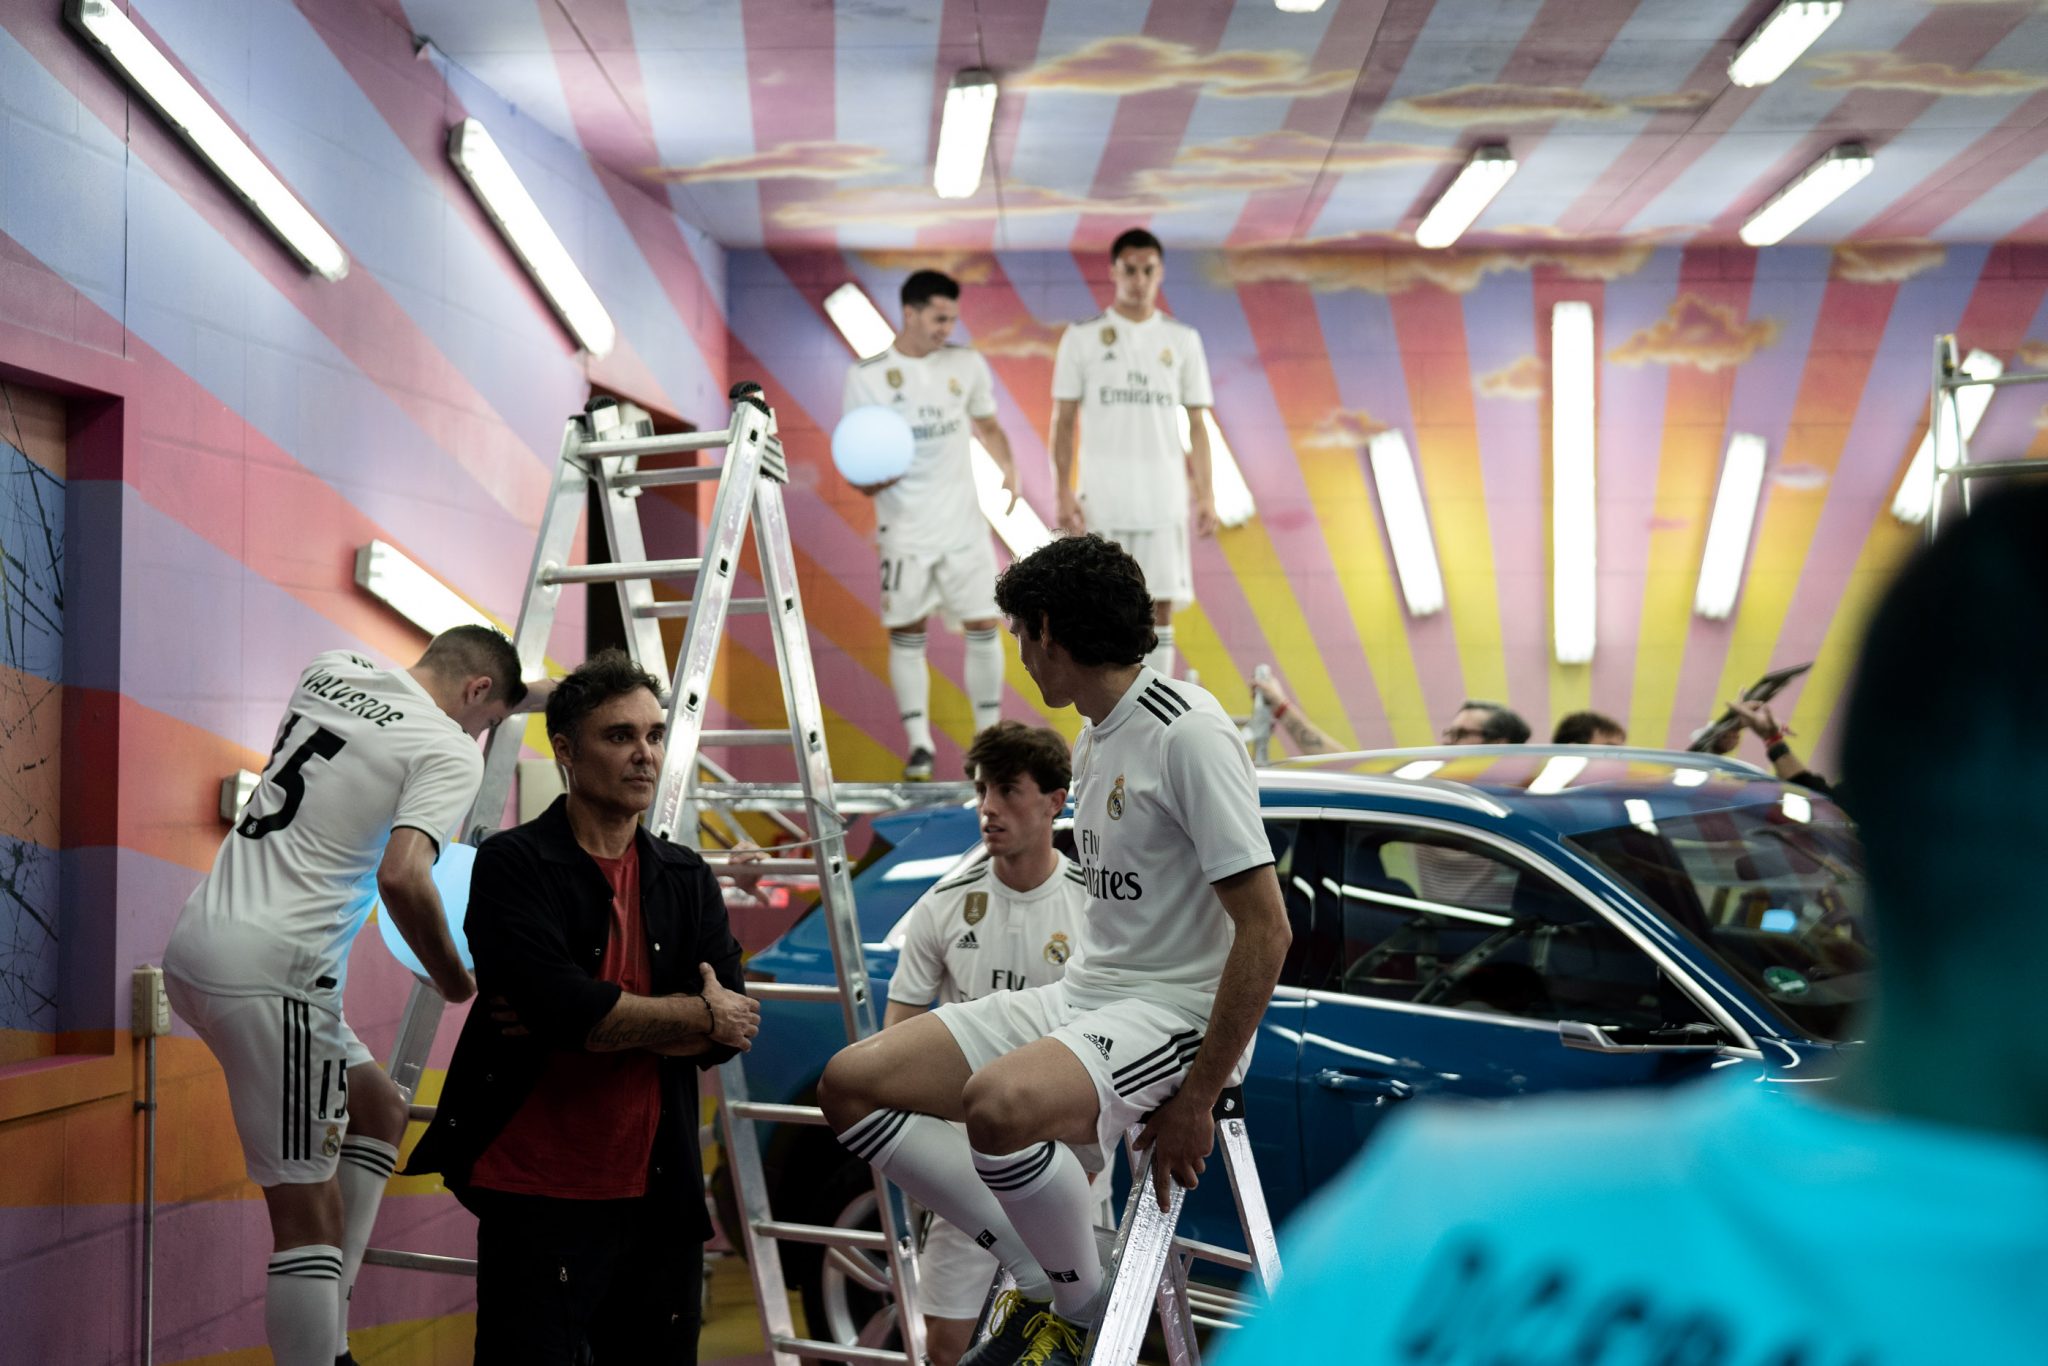 David LaChapelle | Audi x Real Madrid | Behind-the-scenes photographs from the Audi E-tron launch shoot in Madrid. | 14